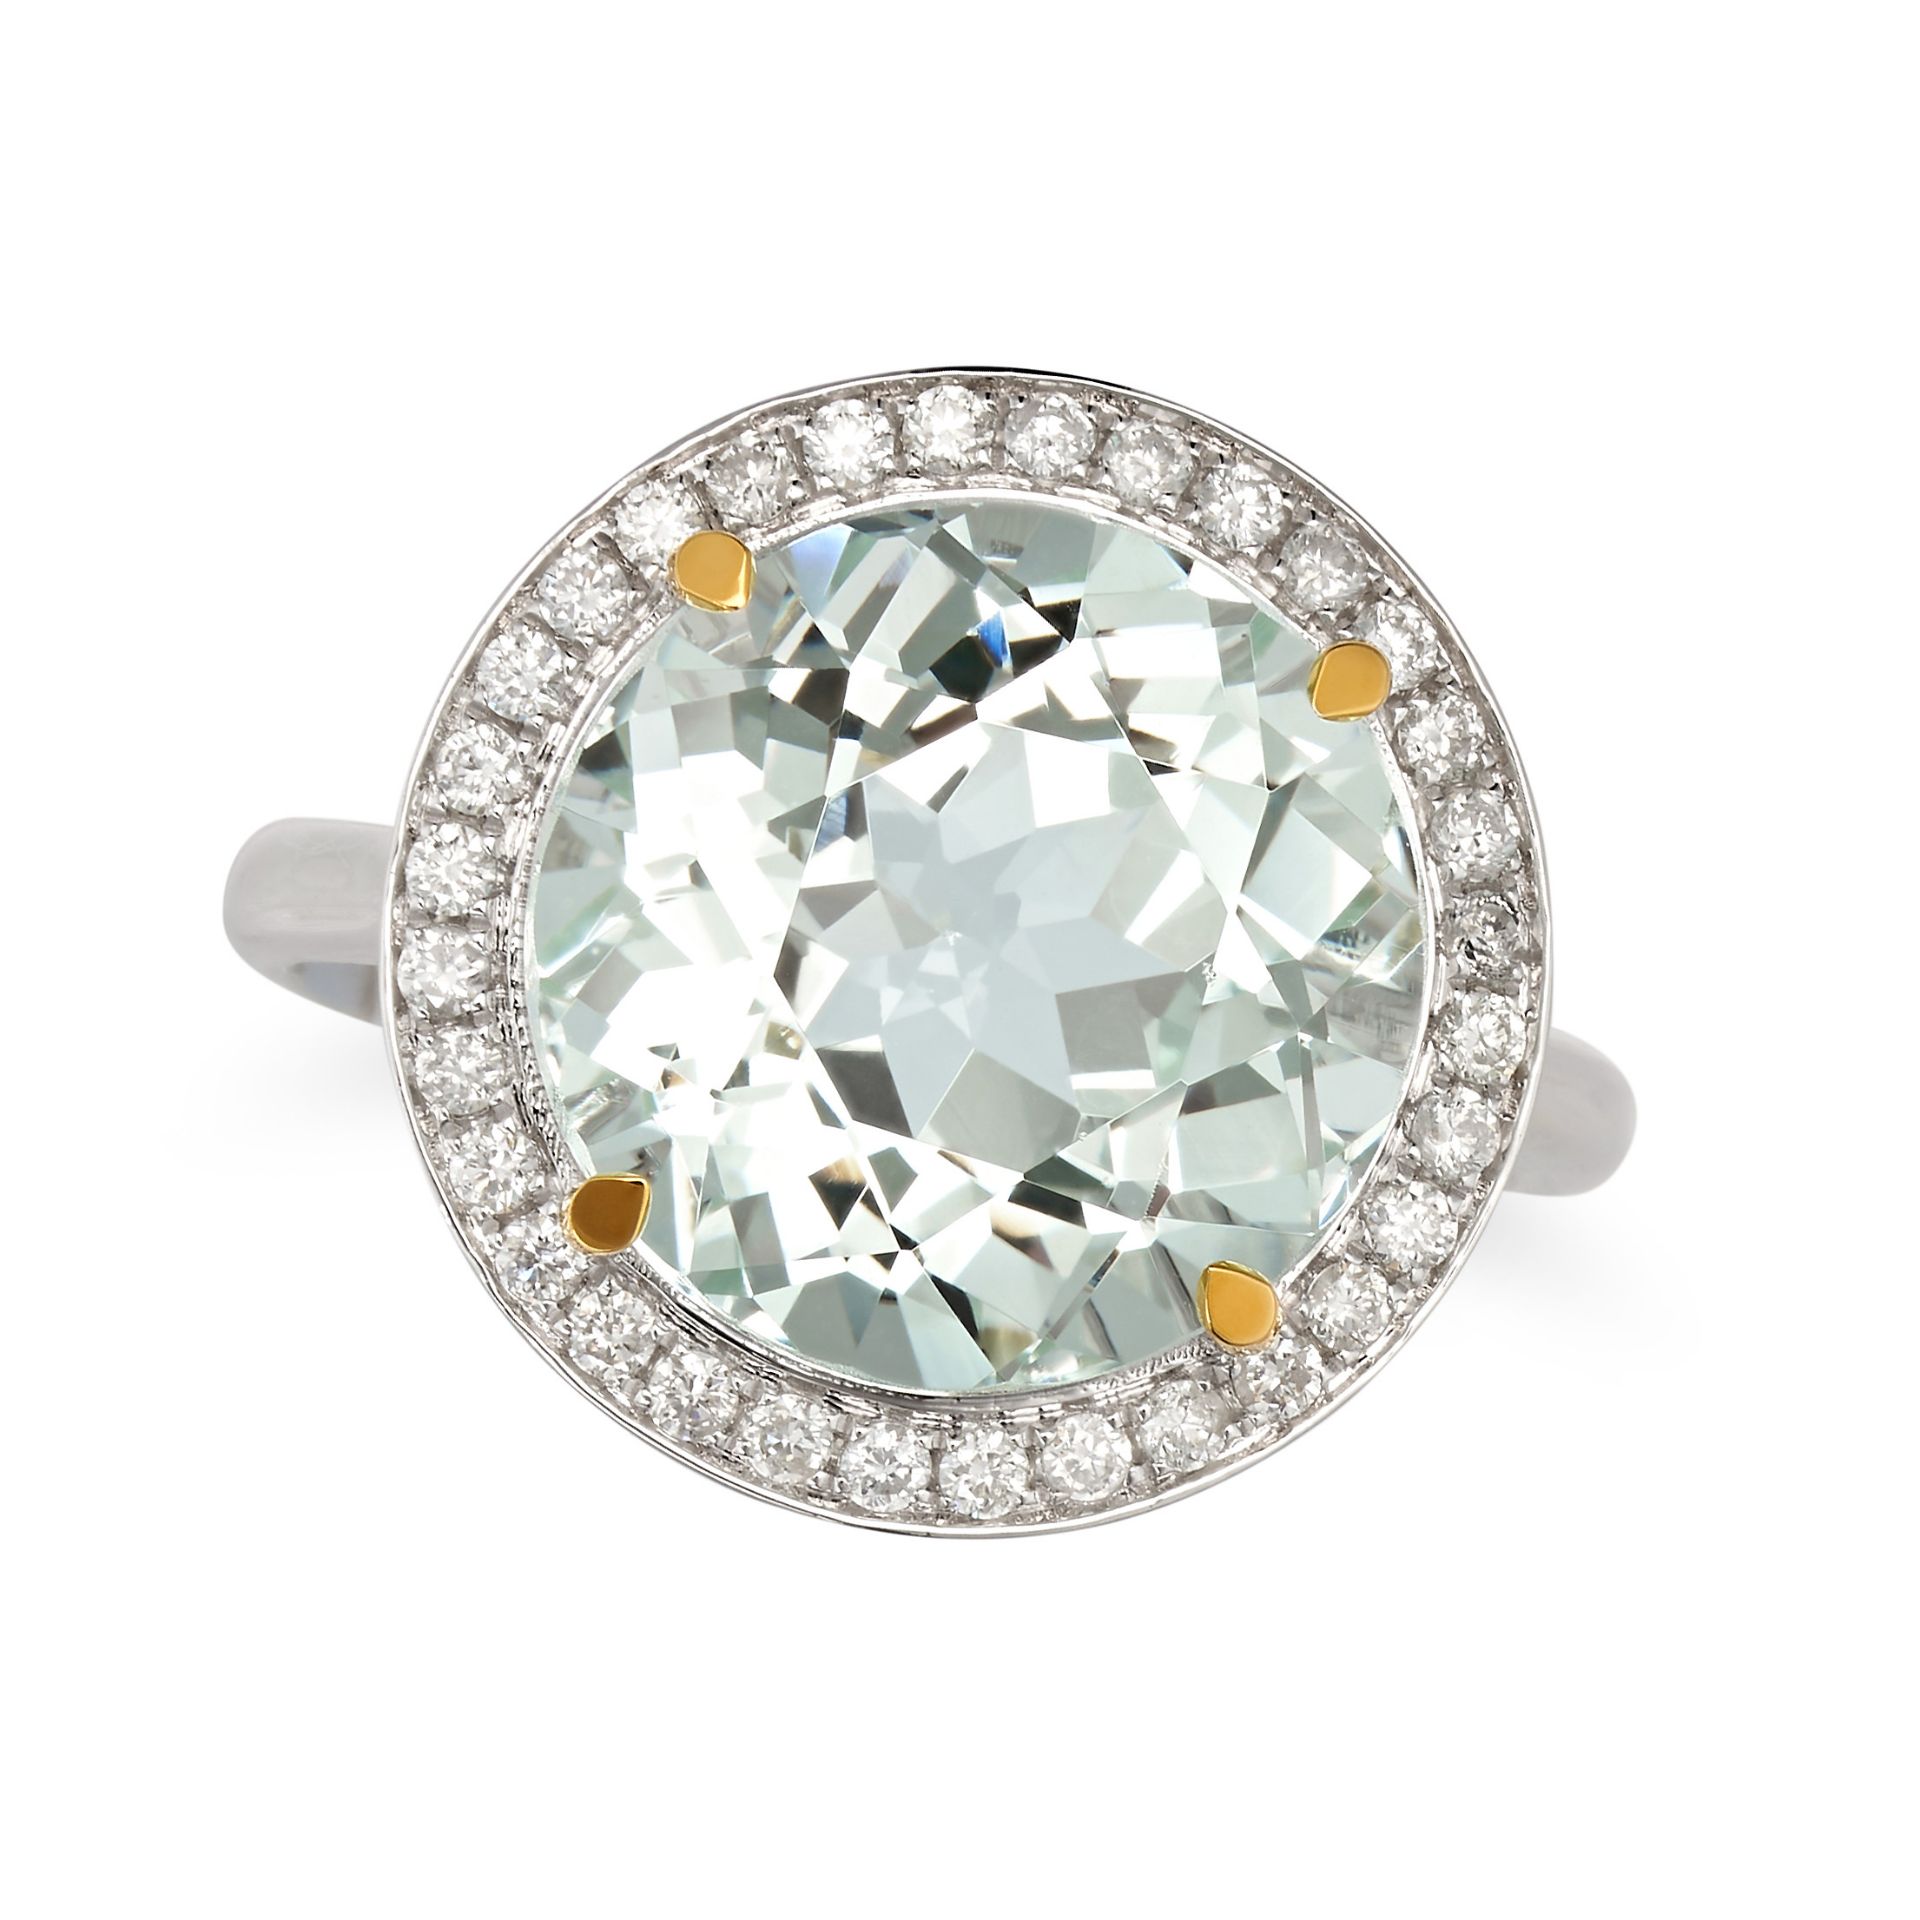 AN AQUAMARINE AND DIAMOND RING in 18ct white gold, set with a round cut aquamarine of 6.71 carats...